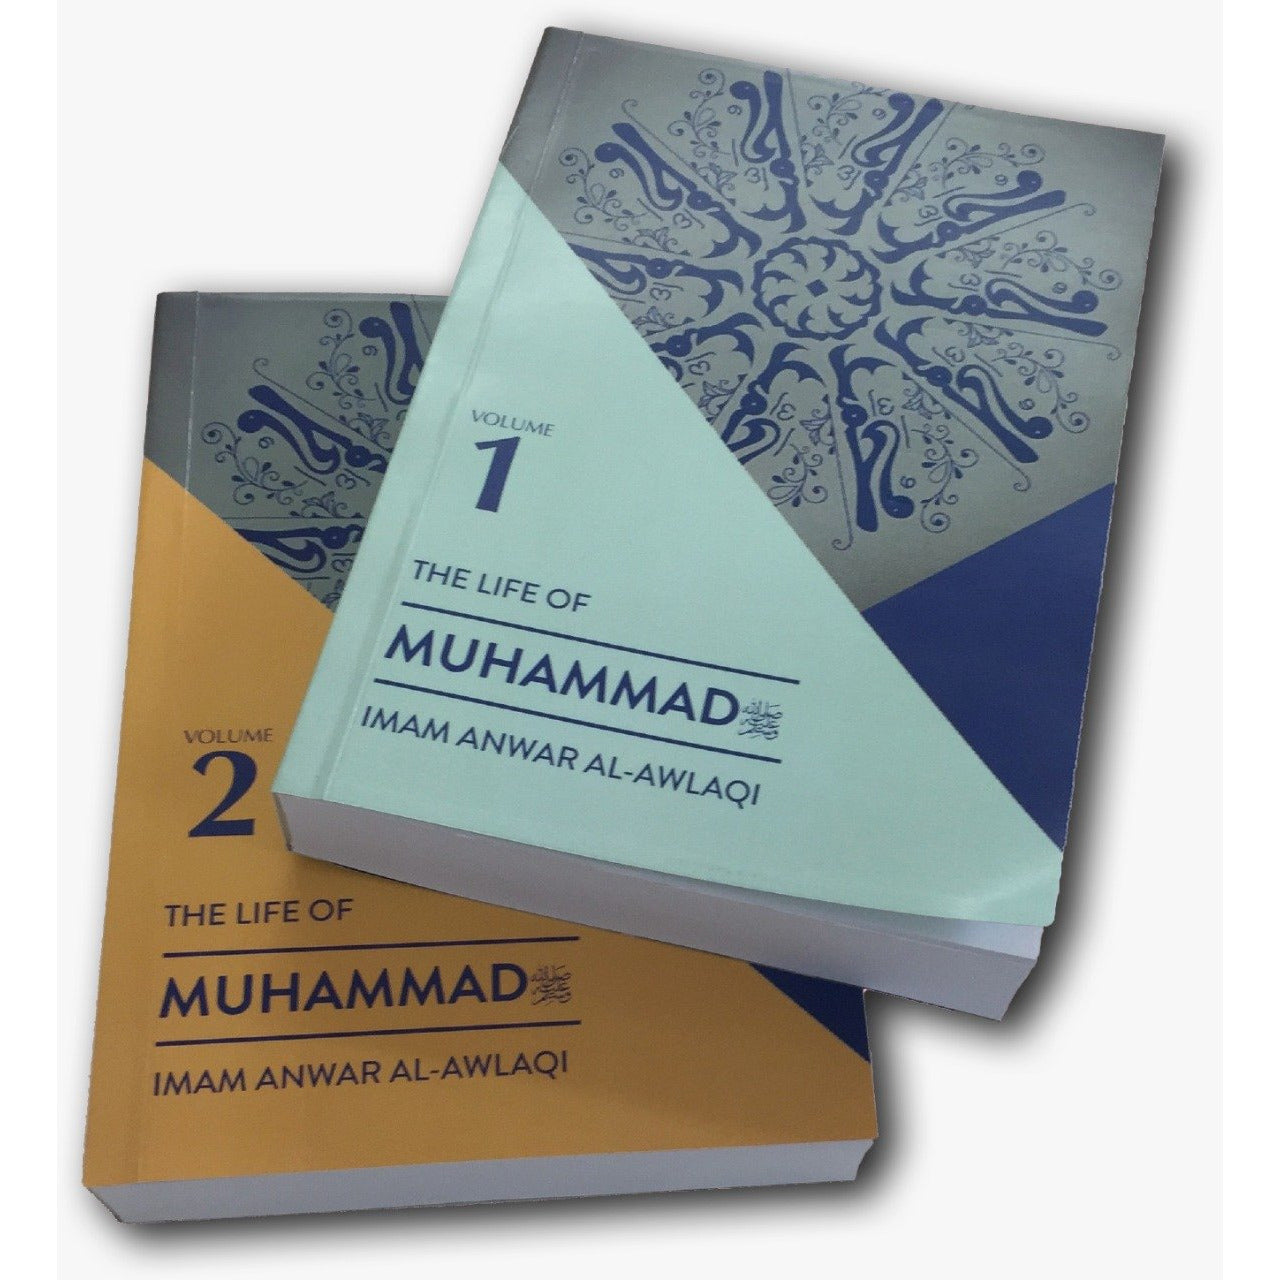 The Life of Muhammad (Awlaqi Seerah) - Buy or Download for Free